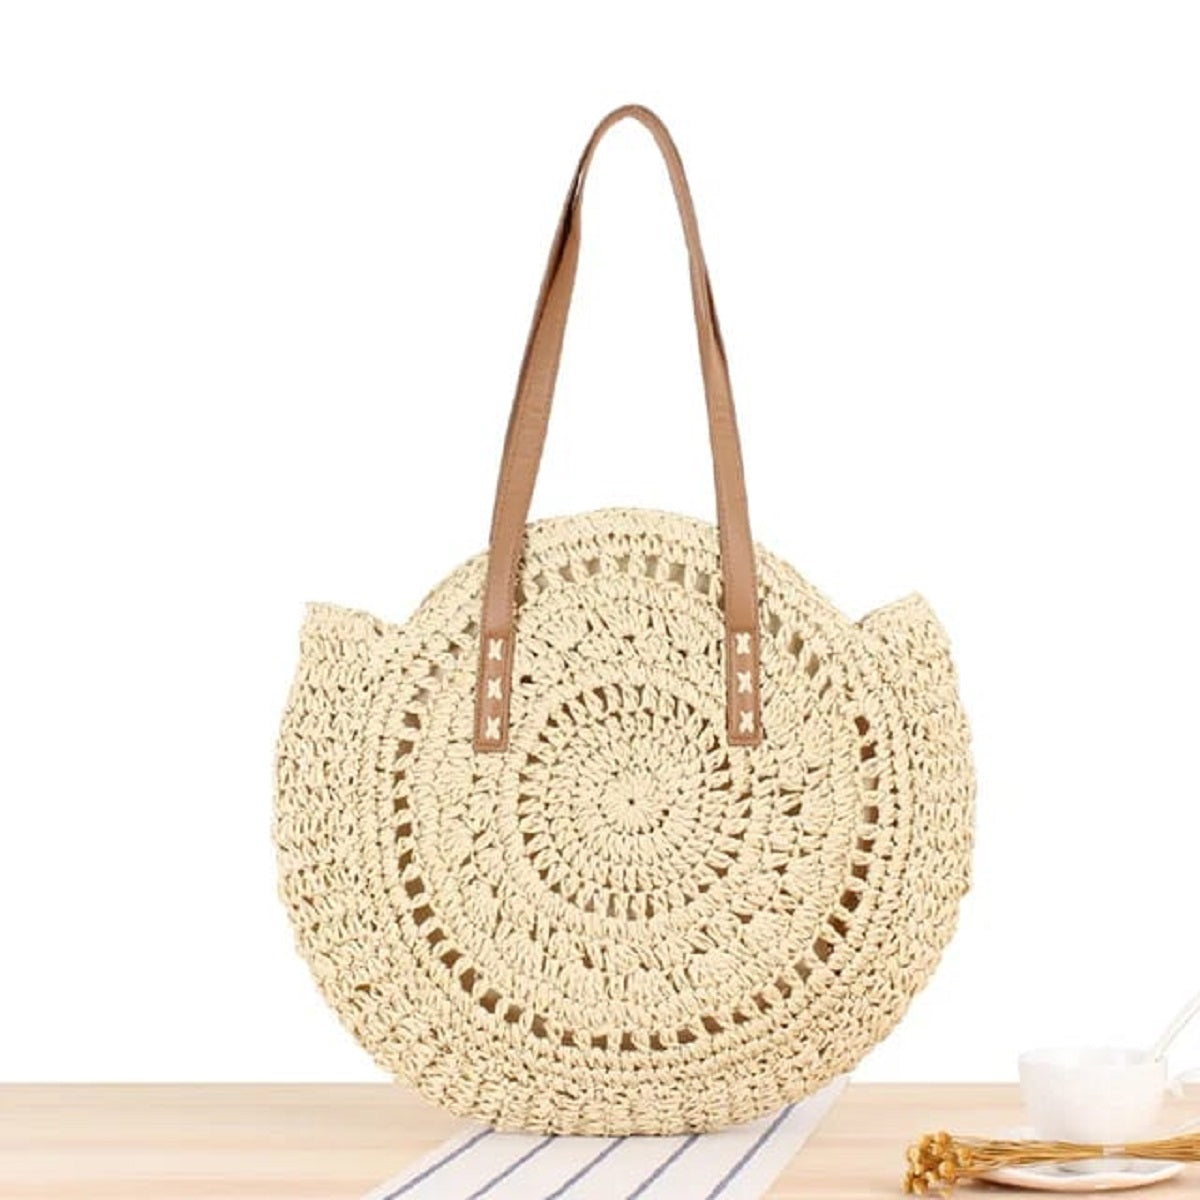 Large bohemian-style tote bag, handwoven from sustainable paper straw, featuring a round shape and inspired by Bali beach aesthetics